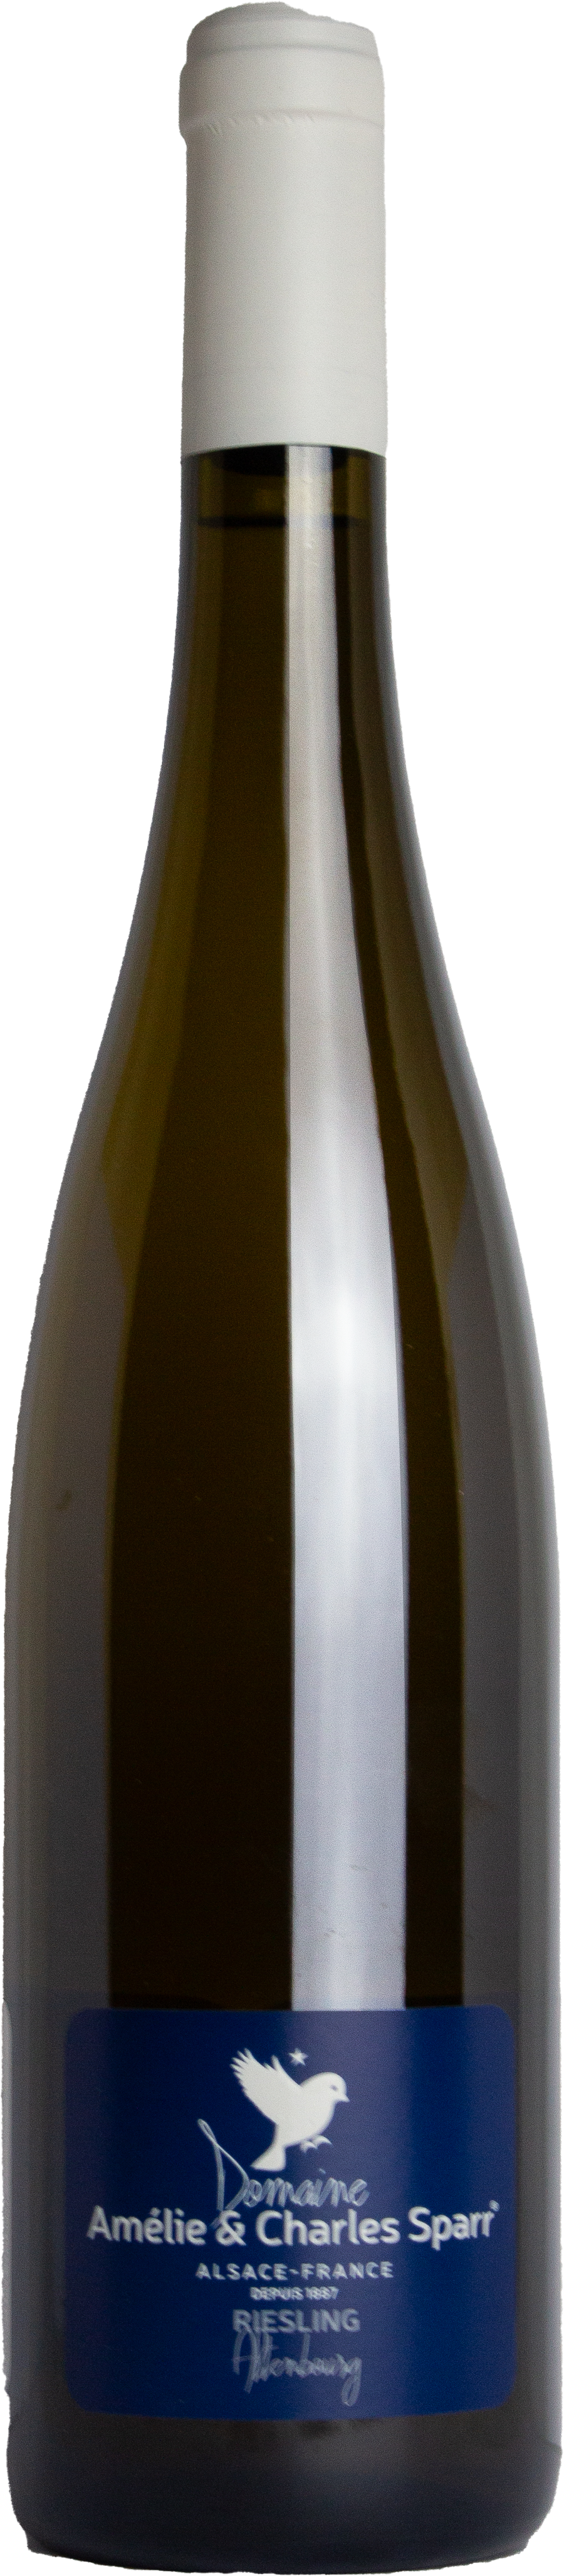 Domaine Charles Sparr - Riesling 